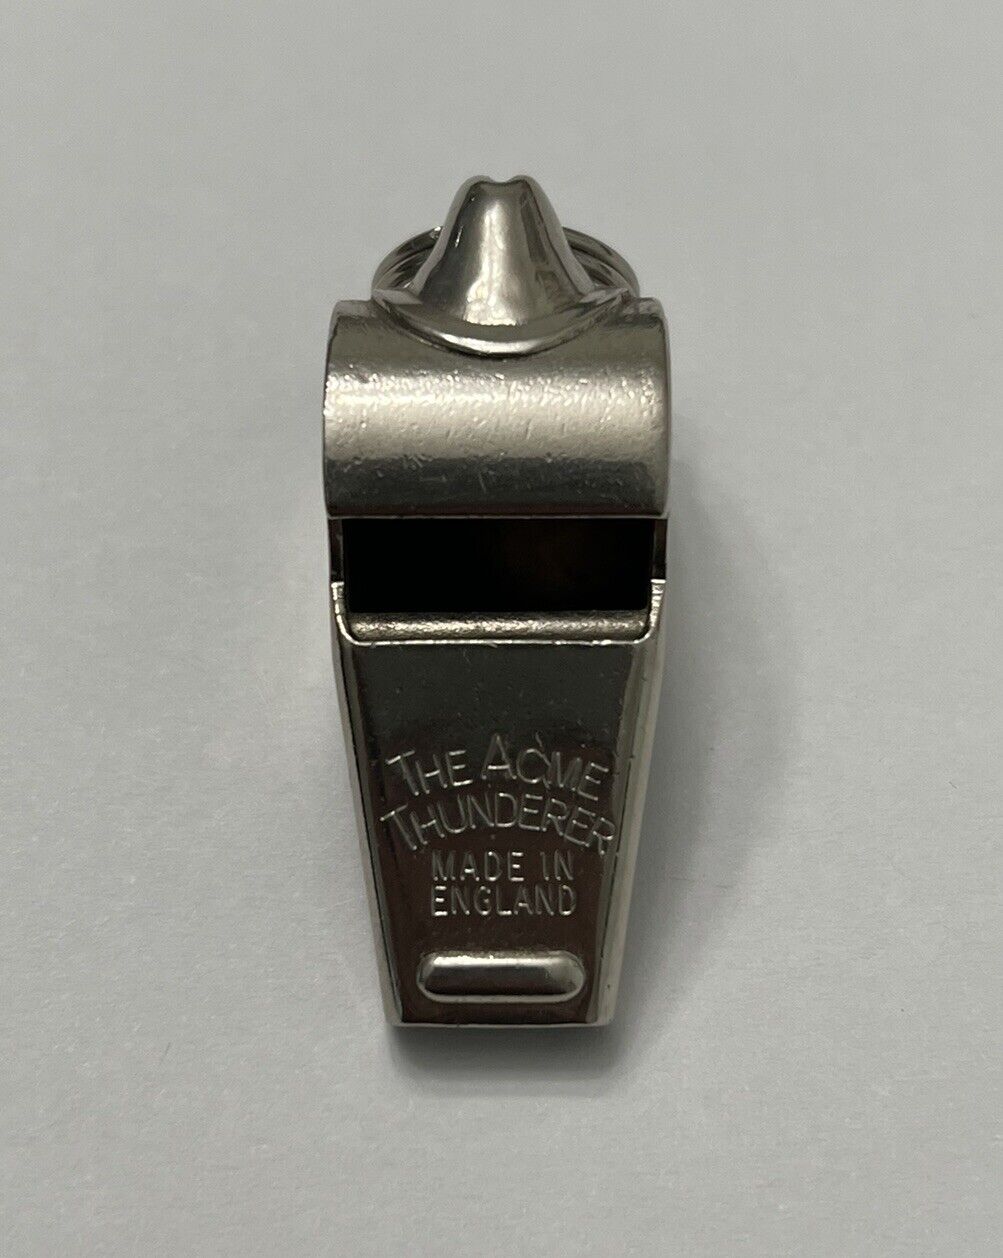 Whistle.Vintage The Acme Thunderer Whistle Made In England